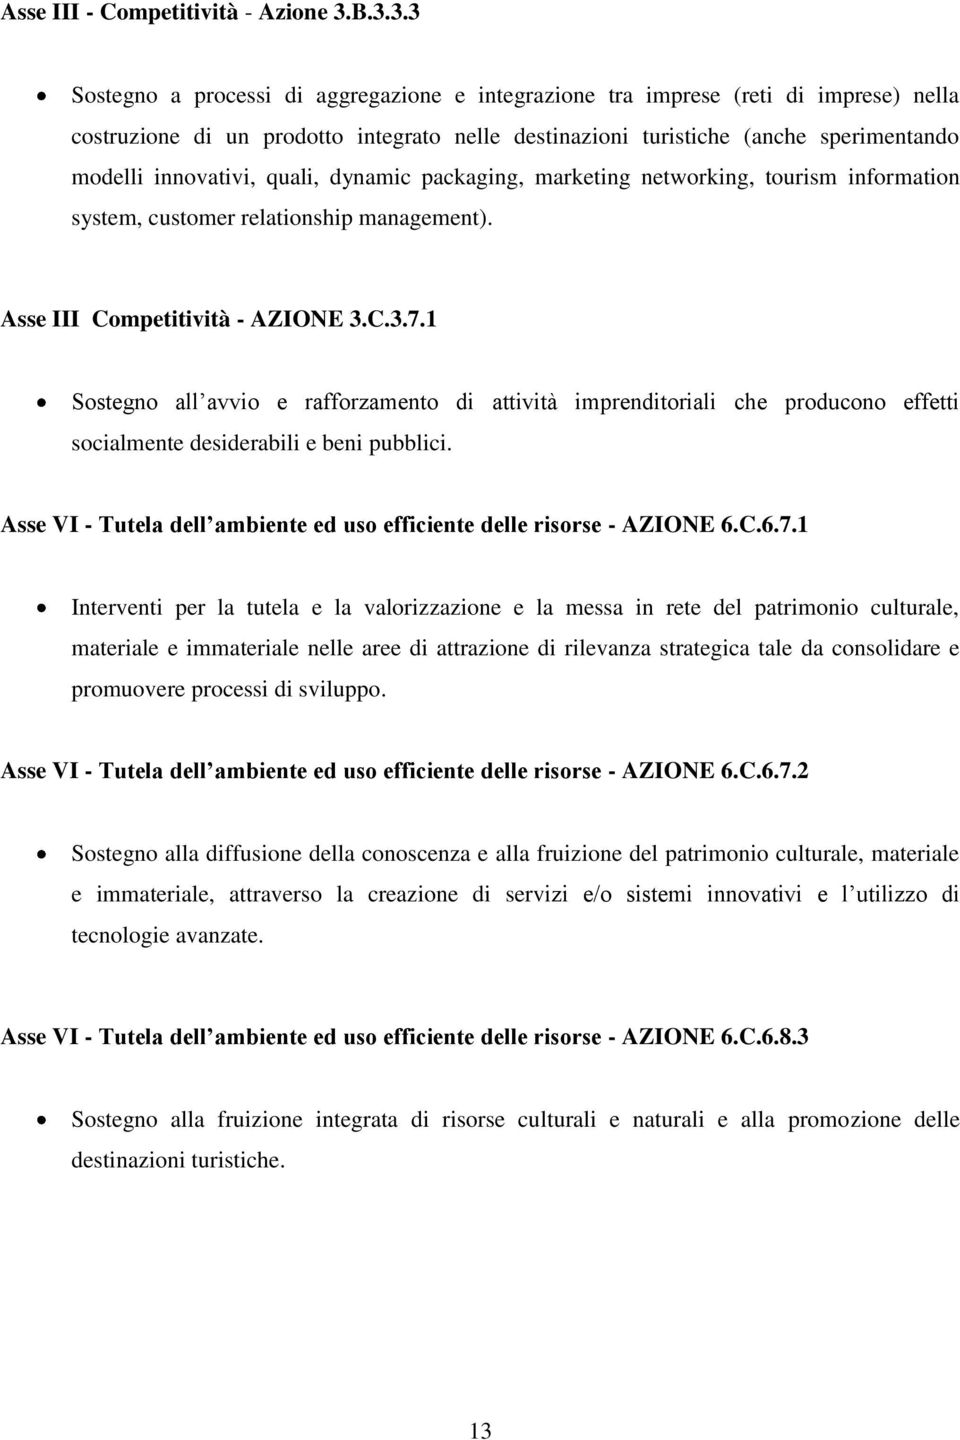 innovativi, quali, dynamic packaging, marketing networking, tourism information system, customer relationship management). Asse III Competitività - AZIONE 3.C.3.7.